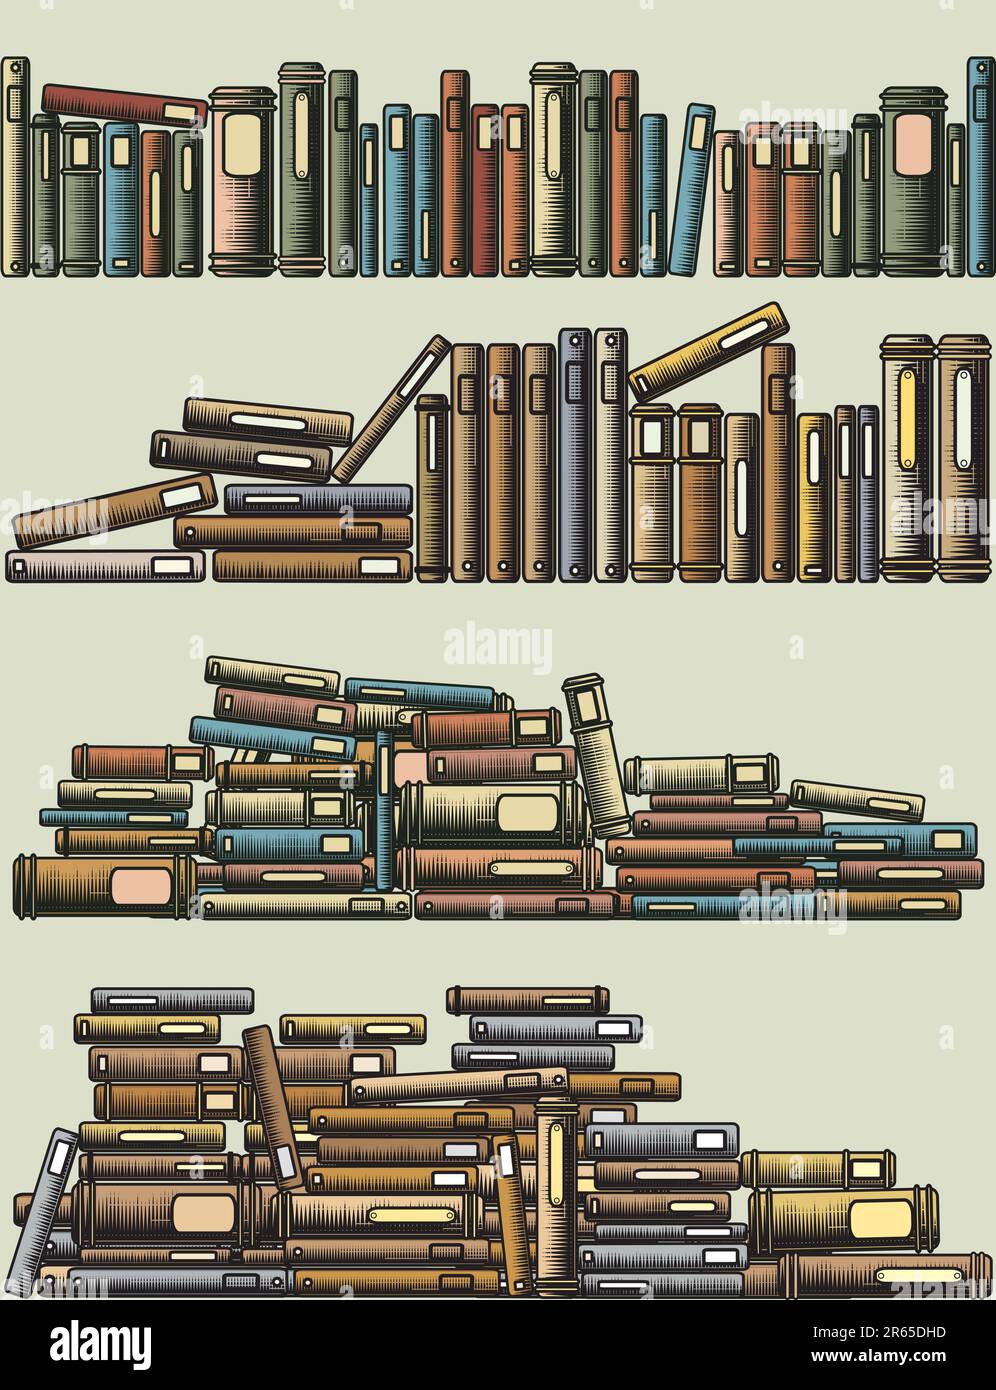 https://c8.alamy.com/comp/2R65DHD/editable-vector-illustrations-of-rows-and-piles-of-books-as-foreground-design-elements-2R65DHD.jpg